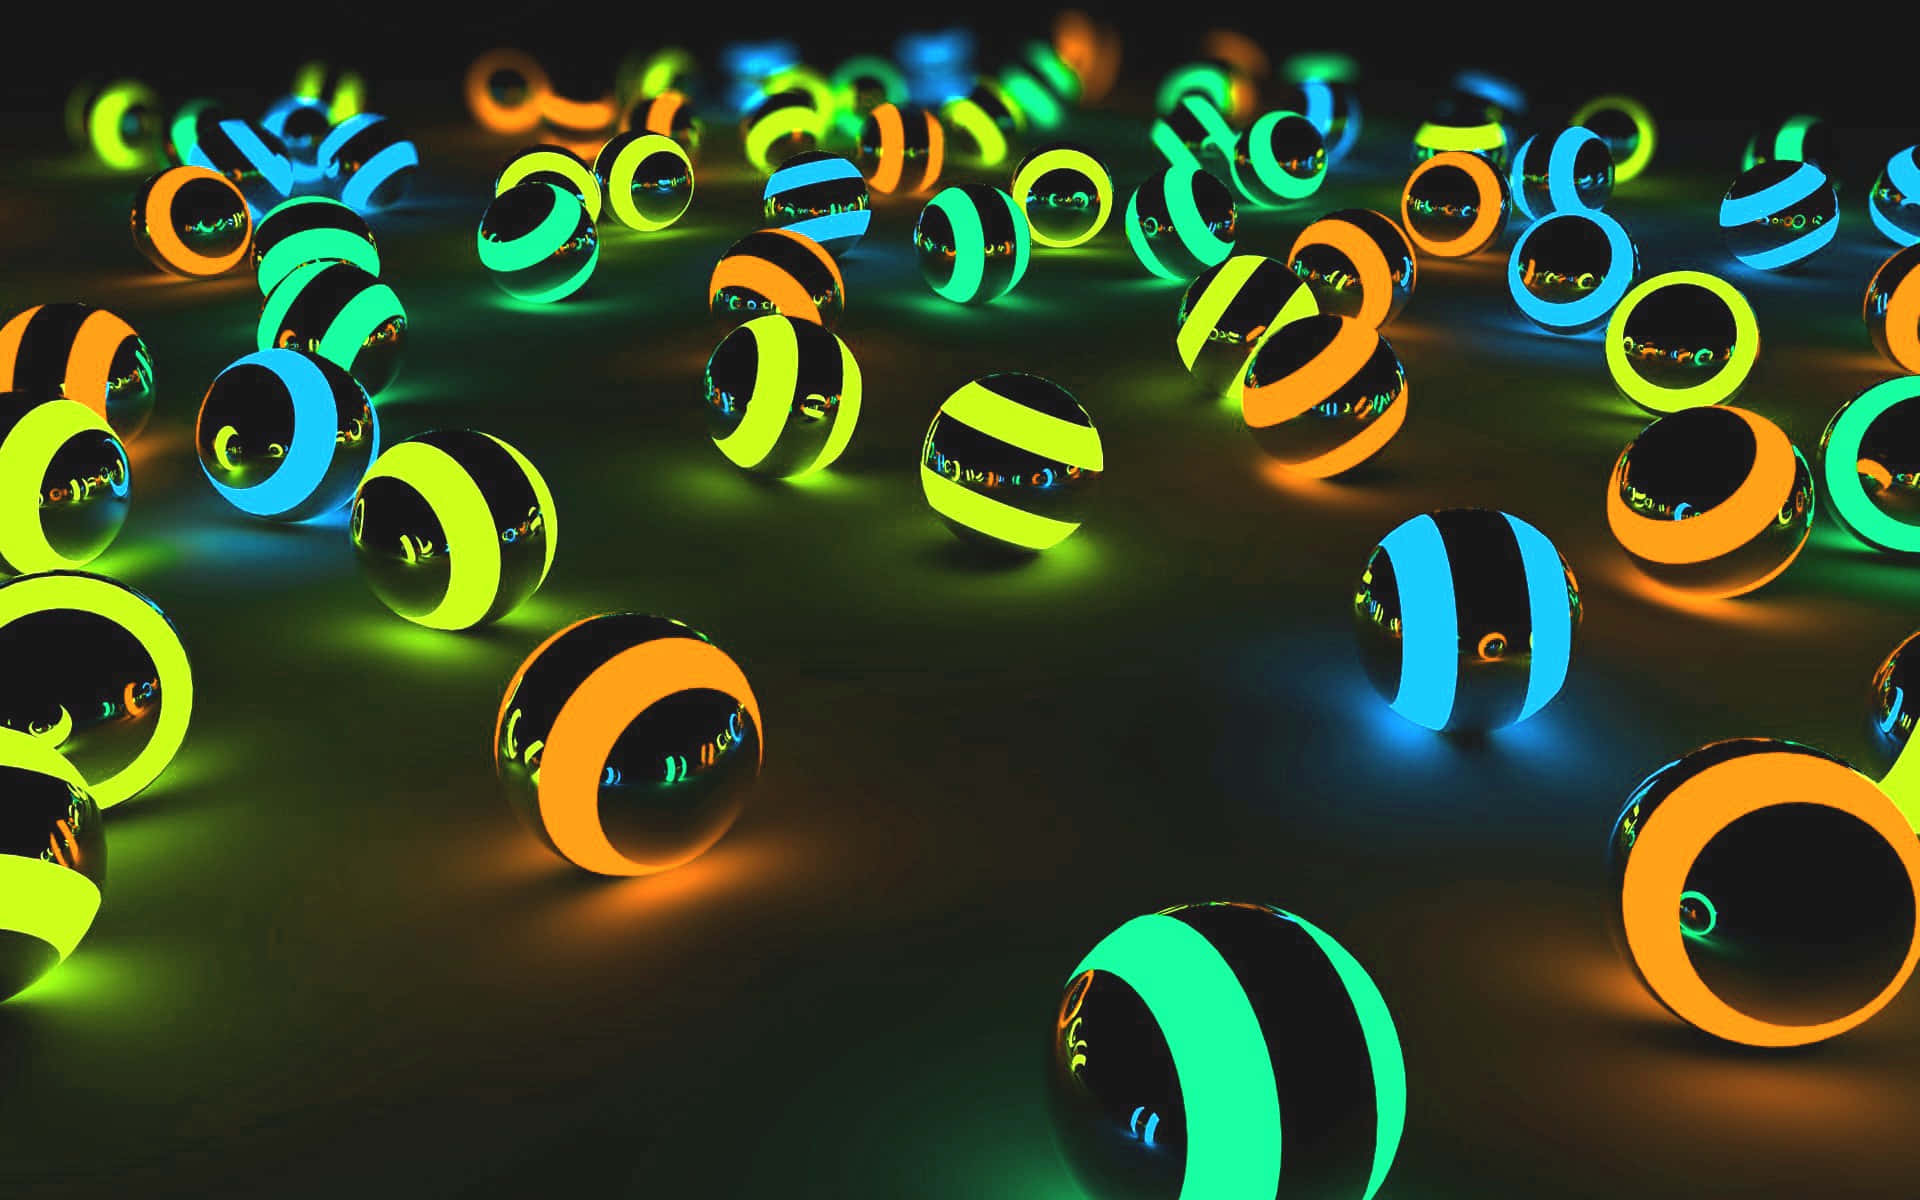 A Group Of Glowing Balls In A Dark Room Background